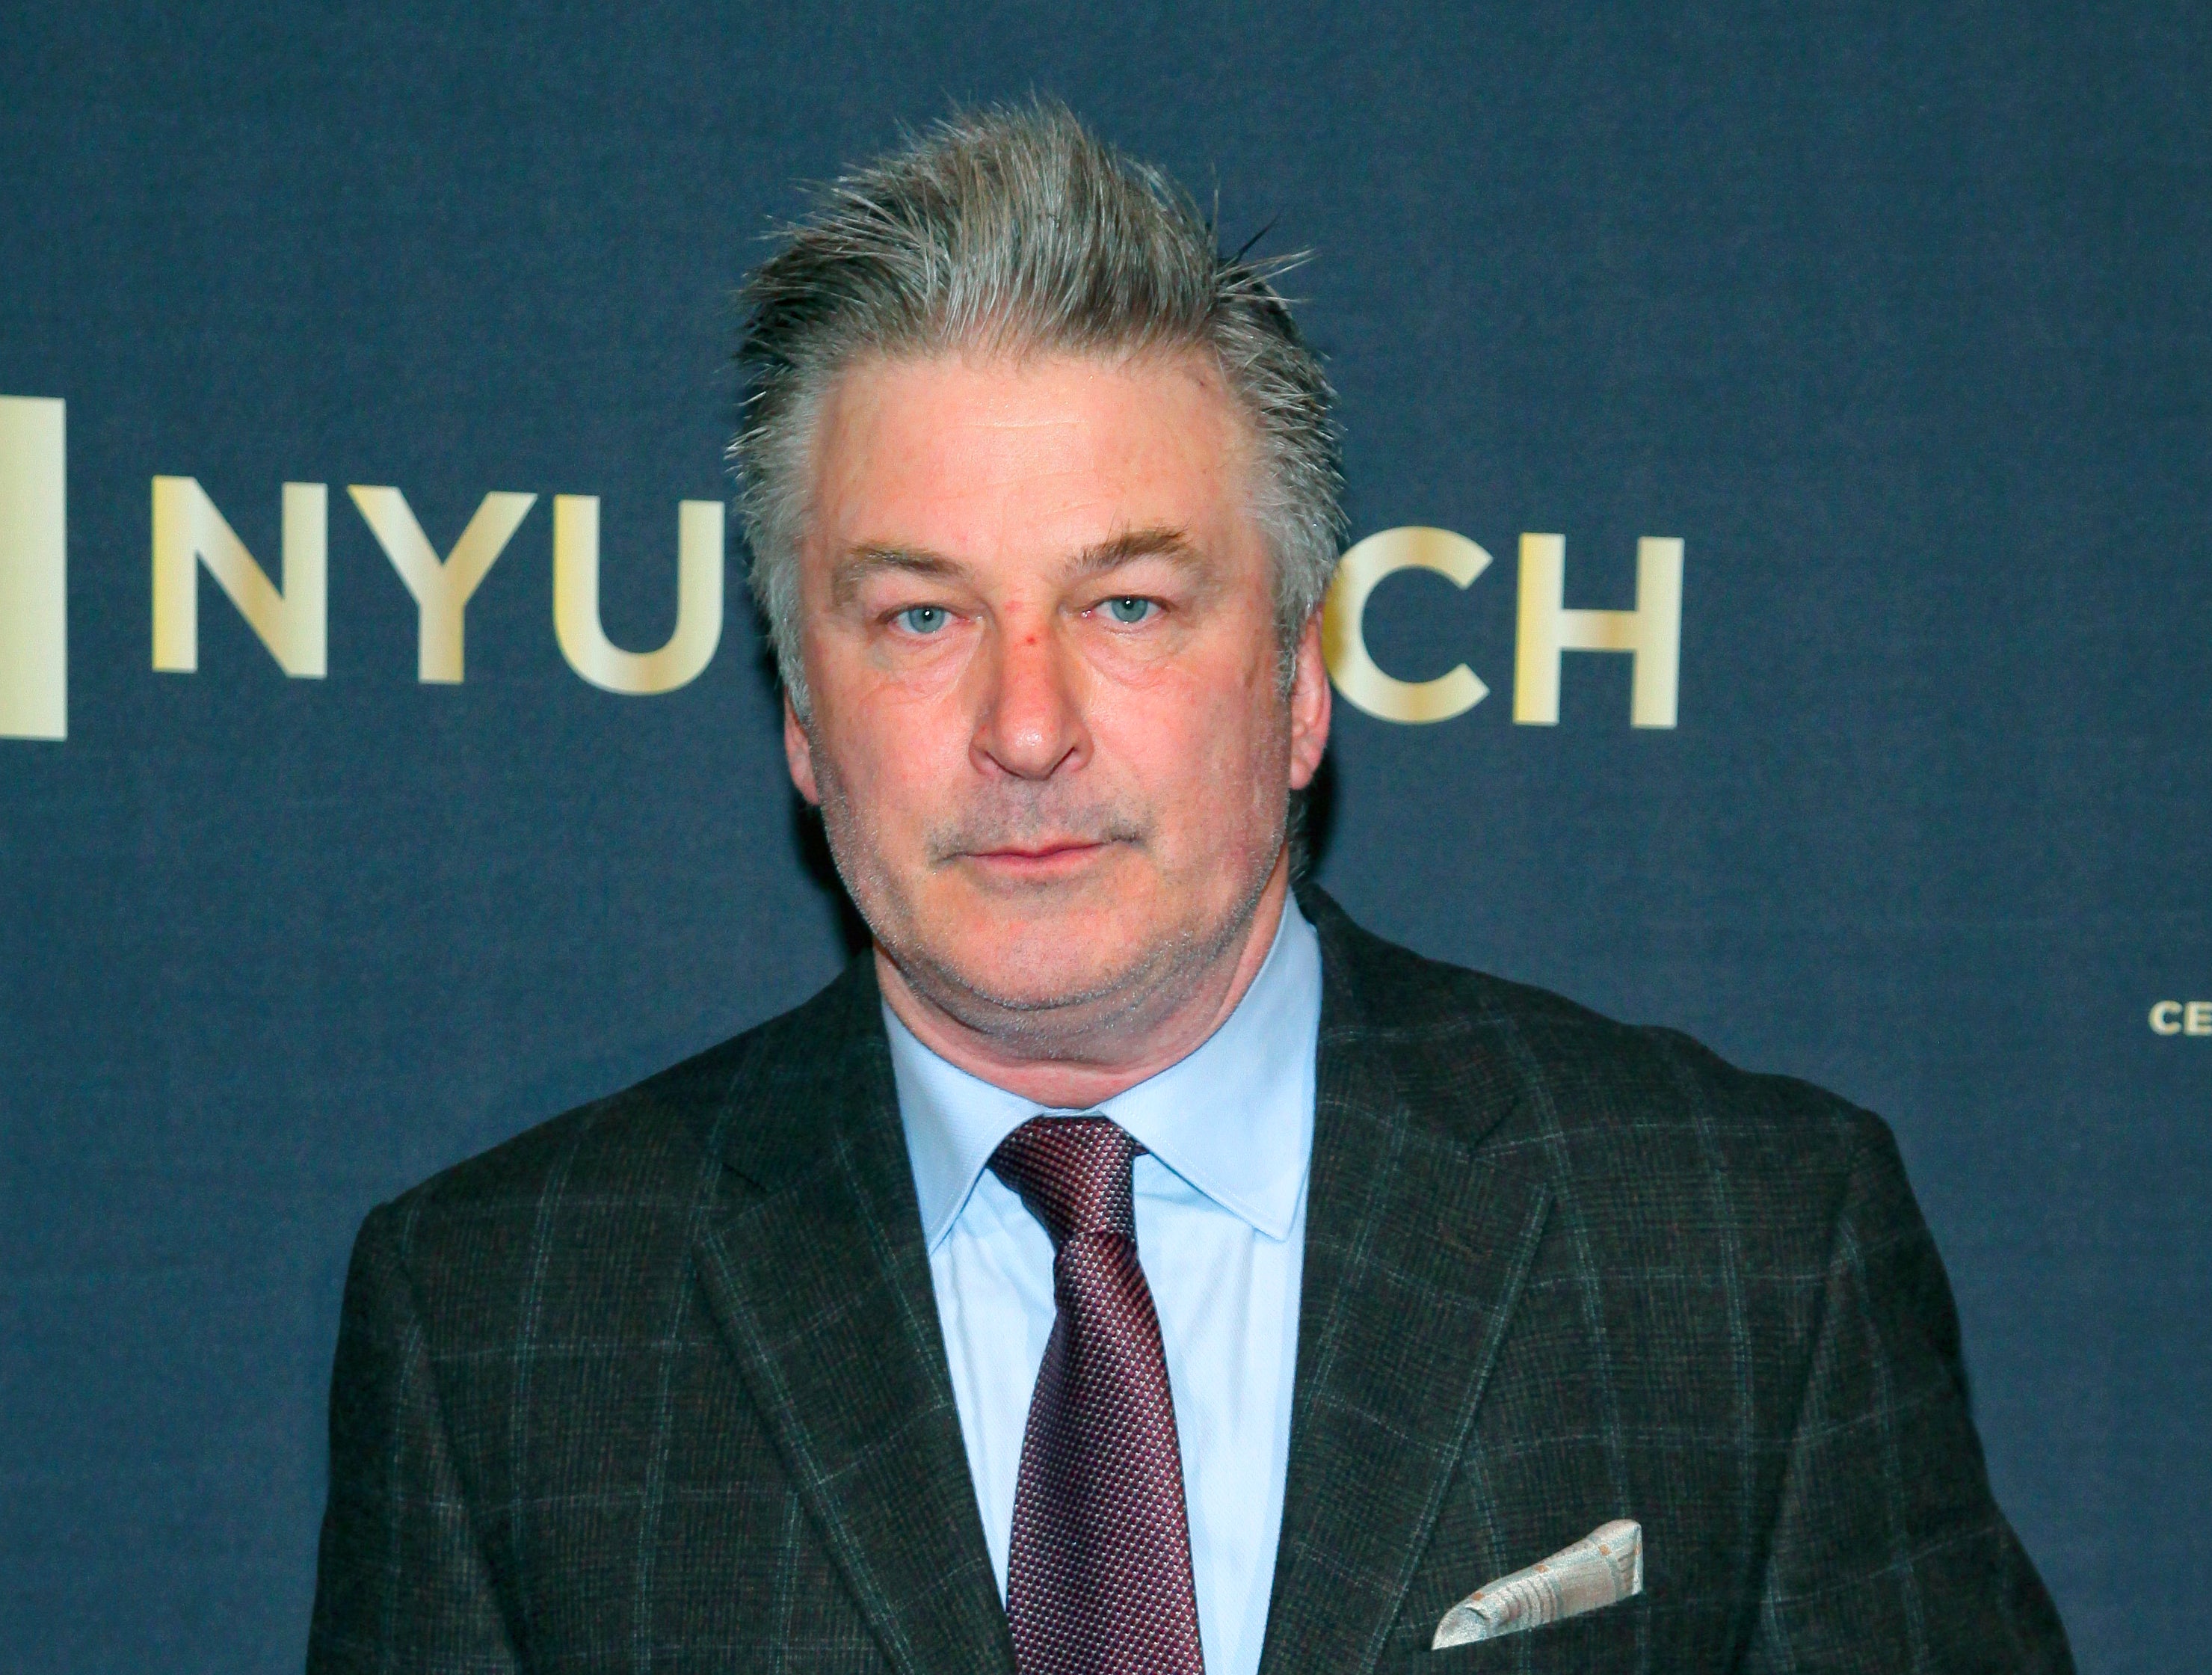 Alec Baldwin has called for a speedy trial after being charged with involuntary manslaughter again